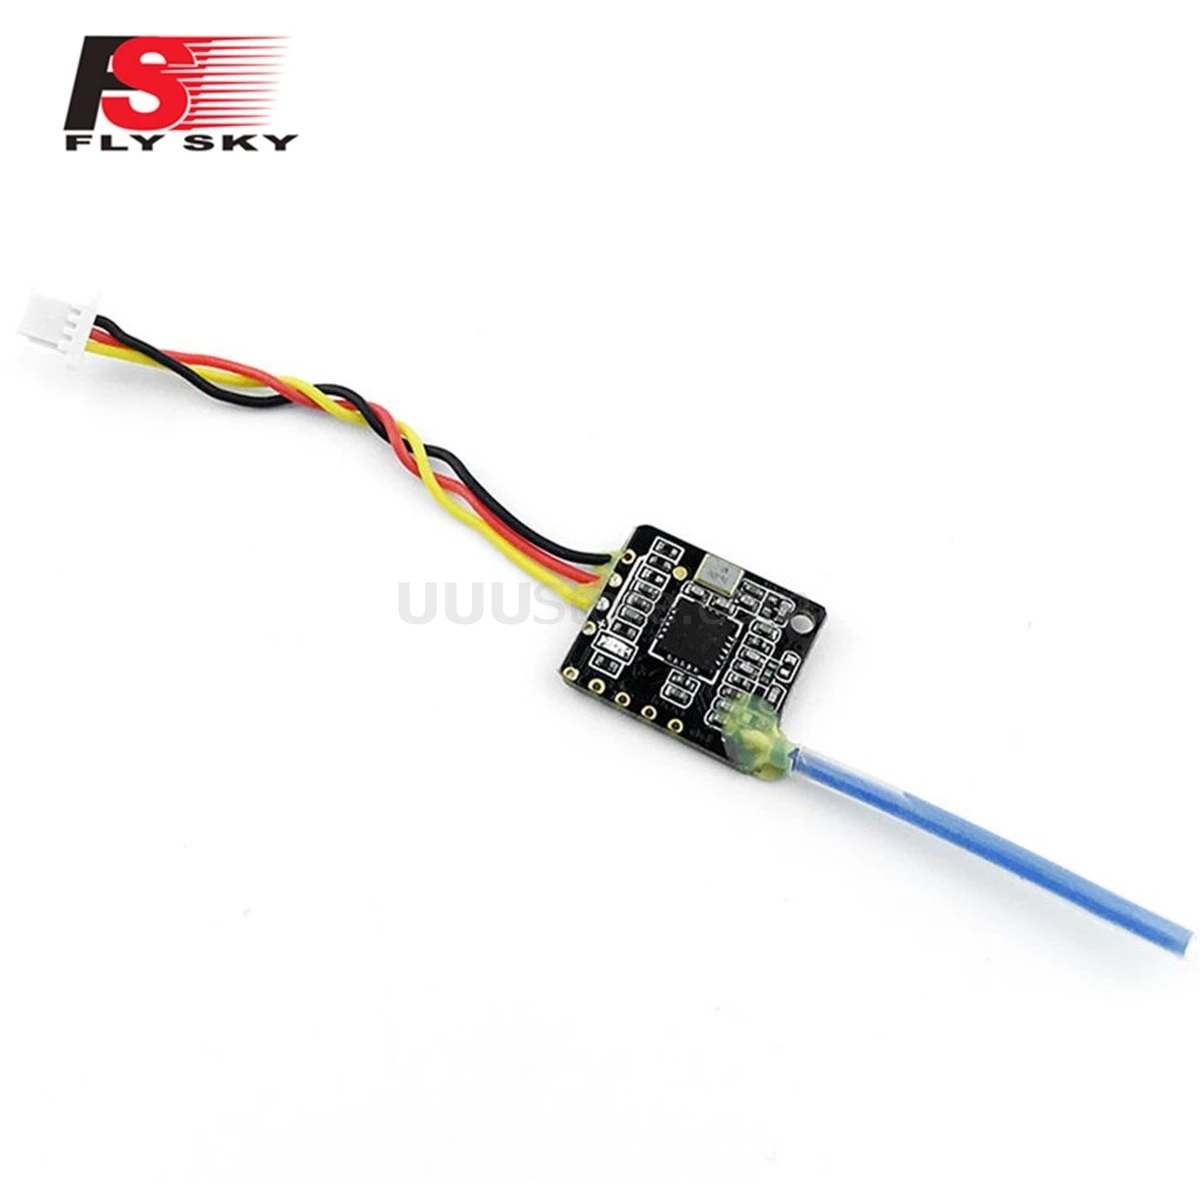 2019 new Flysky IA8X 2.4G 8CH PPM i-BUS Mini Receiver for AFHDS 2A FS-NV14 RC Drone Quadcopter Radio Spare Part DIY Accessories 1